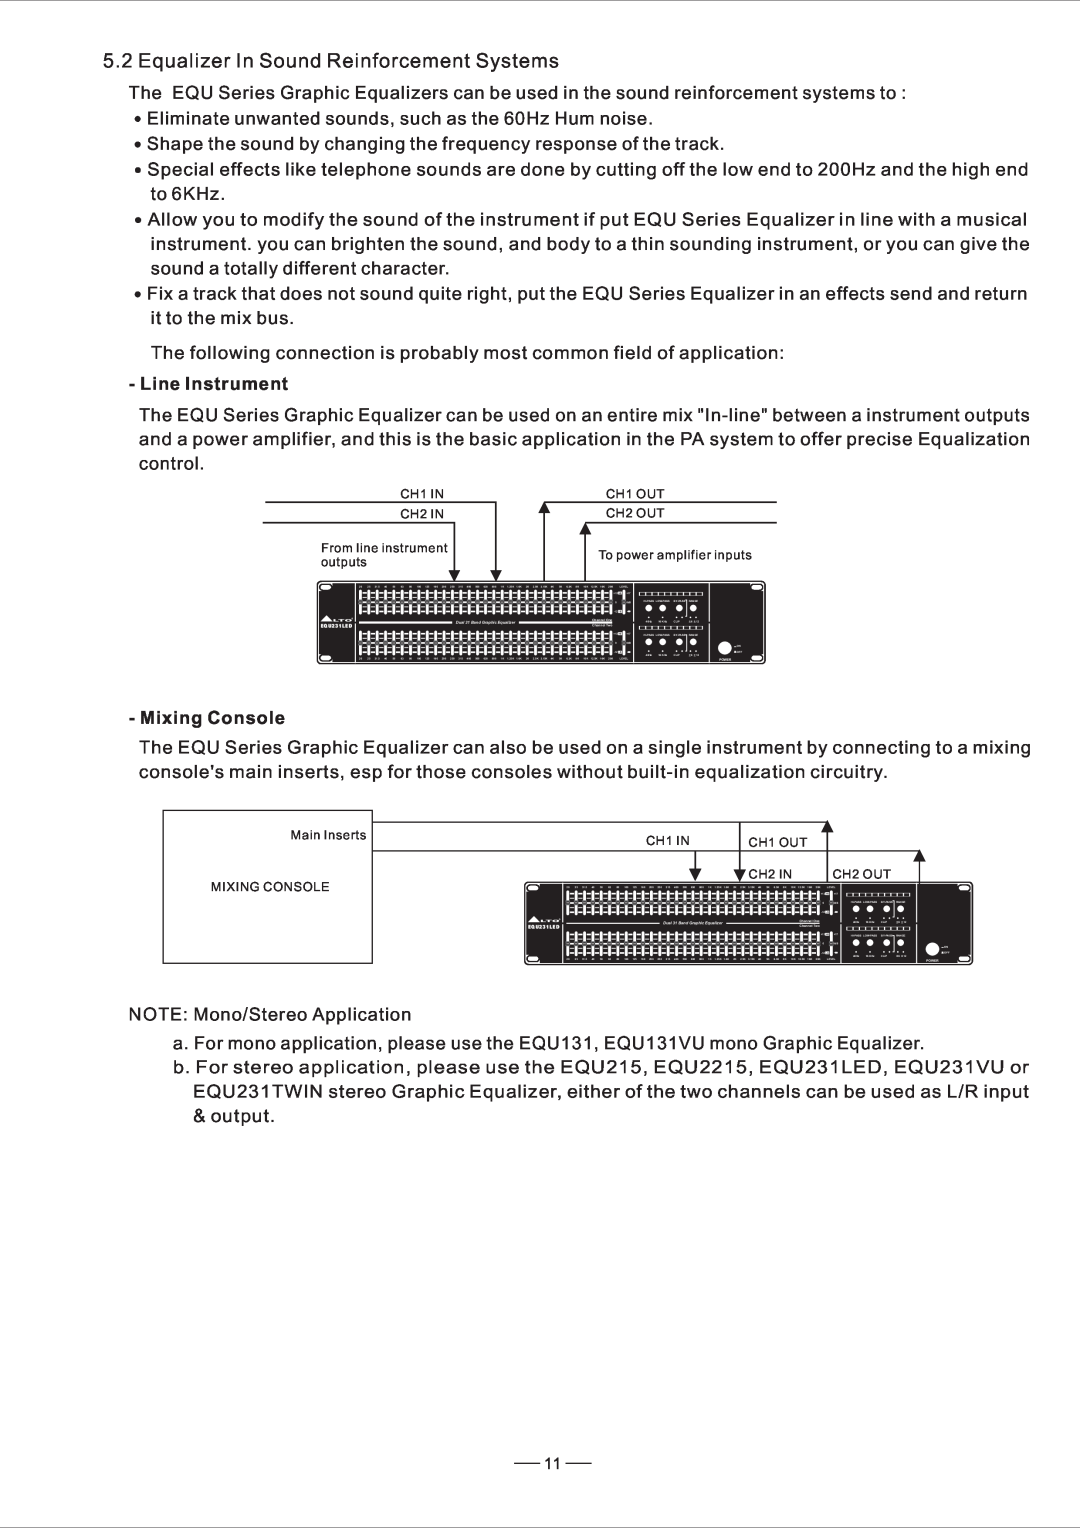 Nilfisk-ALTO EQU user manual Equalizer In Sound Reinforcement Systems, Line Instrument, Mixing Console 